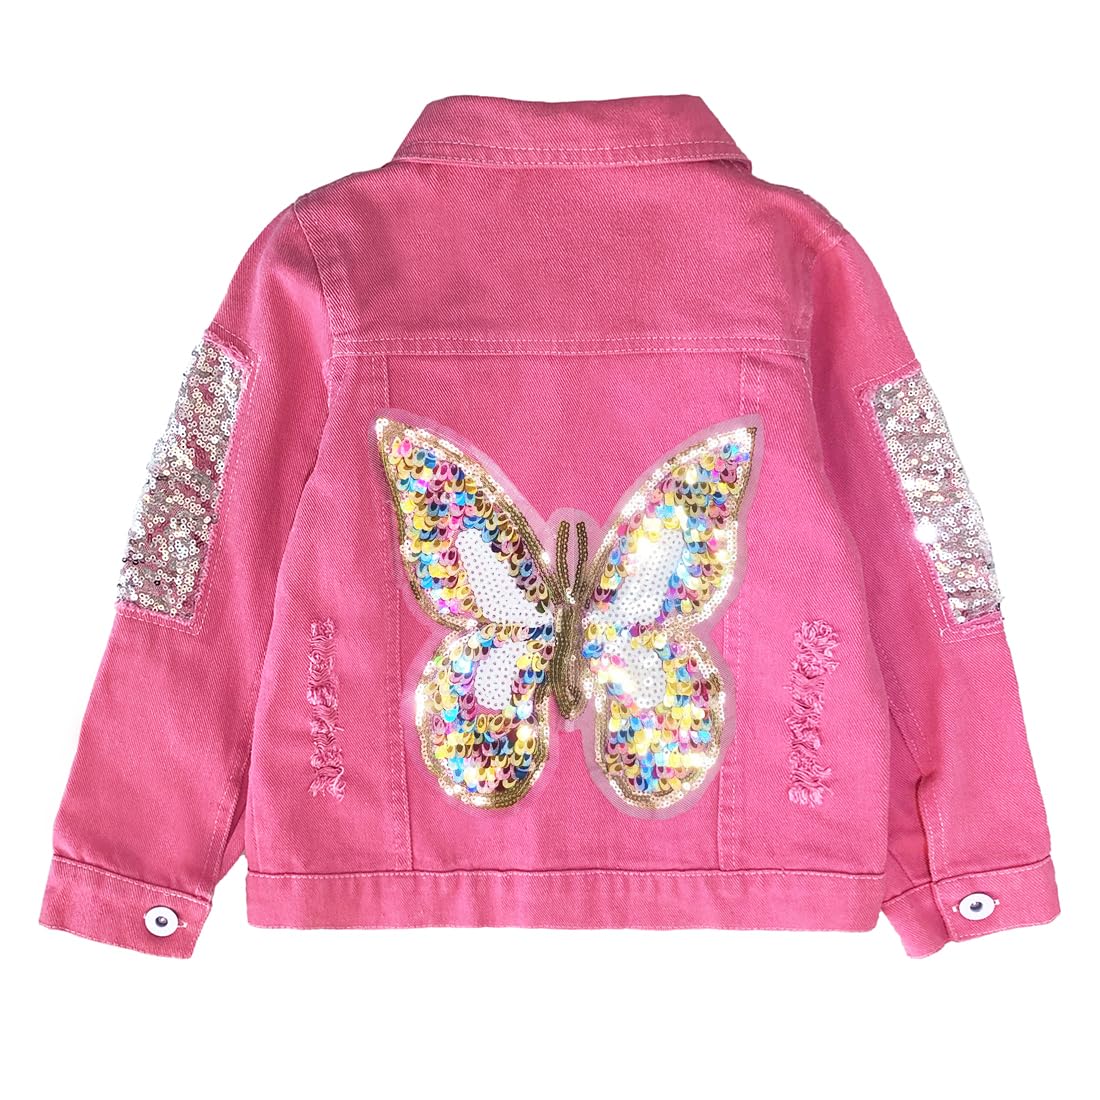 Peacolate 3-7Years Little Big Girl Pink Denim Jacket Butterfly Sequins Outwear